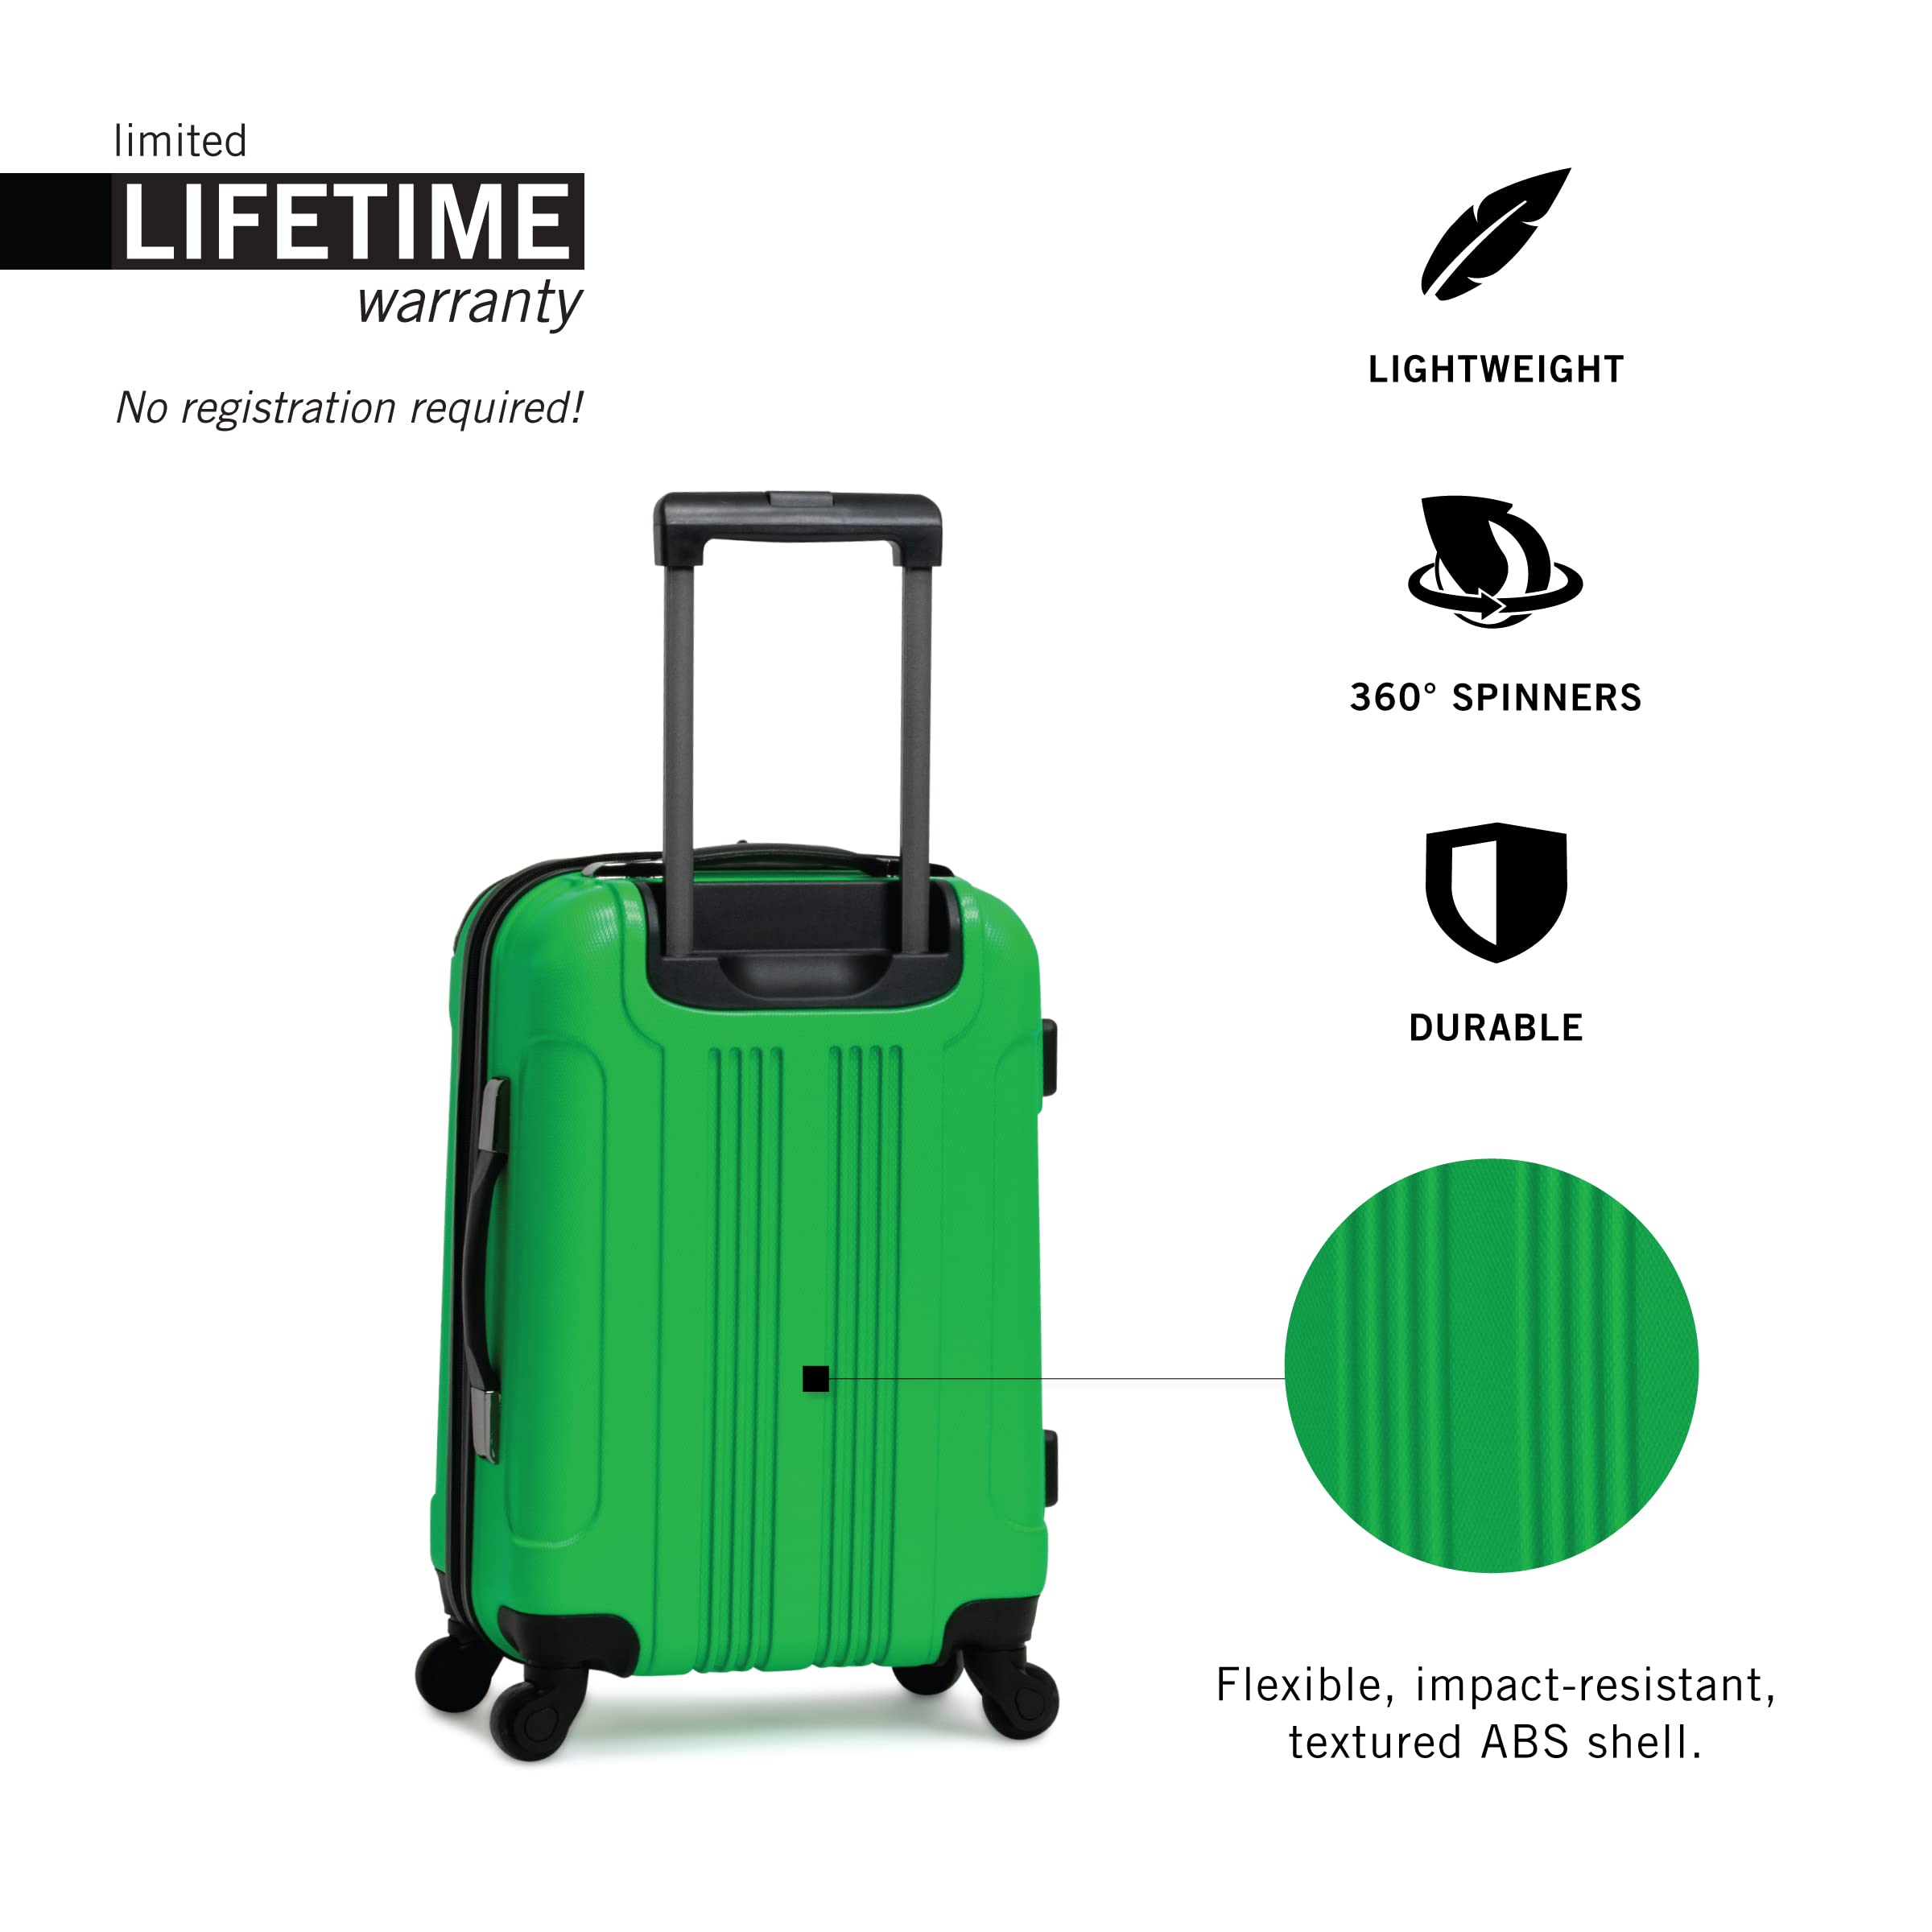 KENNETH COLE REACTION Out Of Bounds Luggage Collection Lightweight Durable Hardside 4-Wheel Spinner Travel Suitcase Bags, Kelly Green, 28-Inch Checked